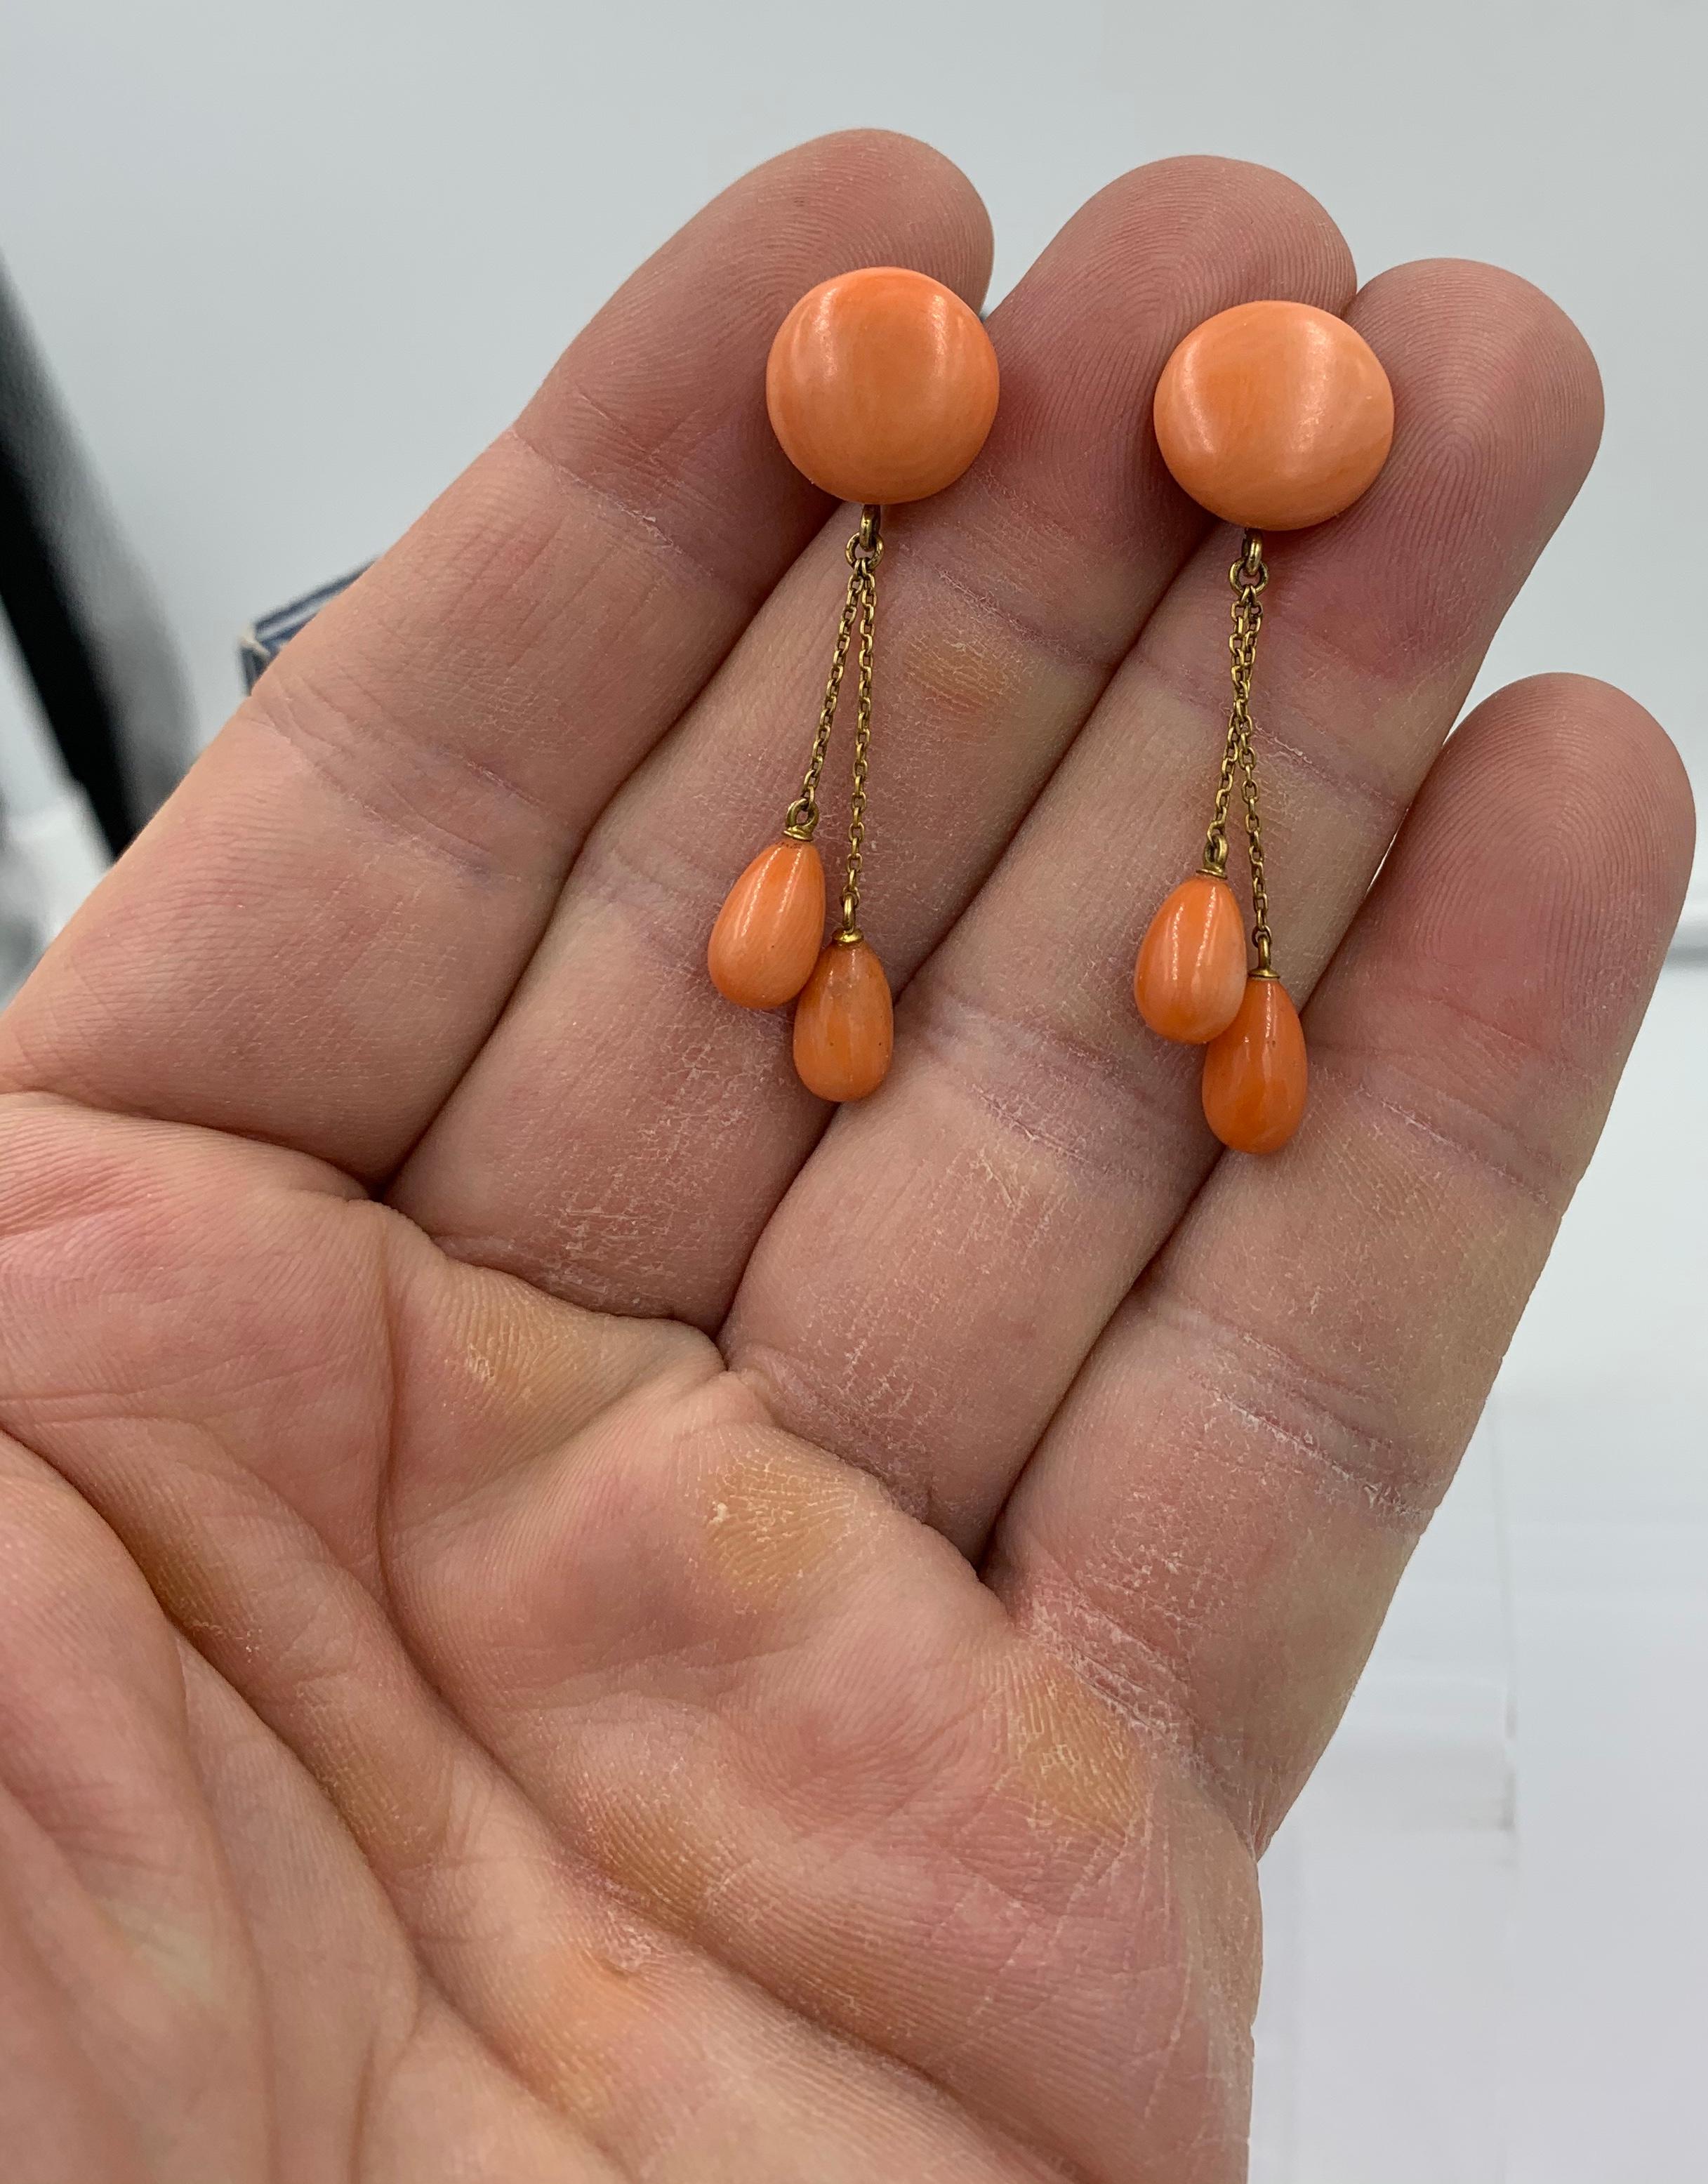 A gorgeous pair of Victorian Coral Dangle Drop Earrings in 14 Karat Gold.  The stunning 2 inch long earrings have round natural Coral cabochons of 14mm (just over 1/2 inch) in diameter at the top.  From the top hang two articulated chains with pear